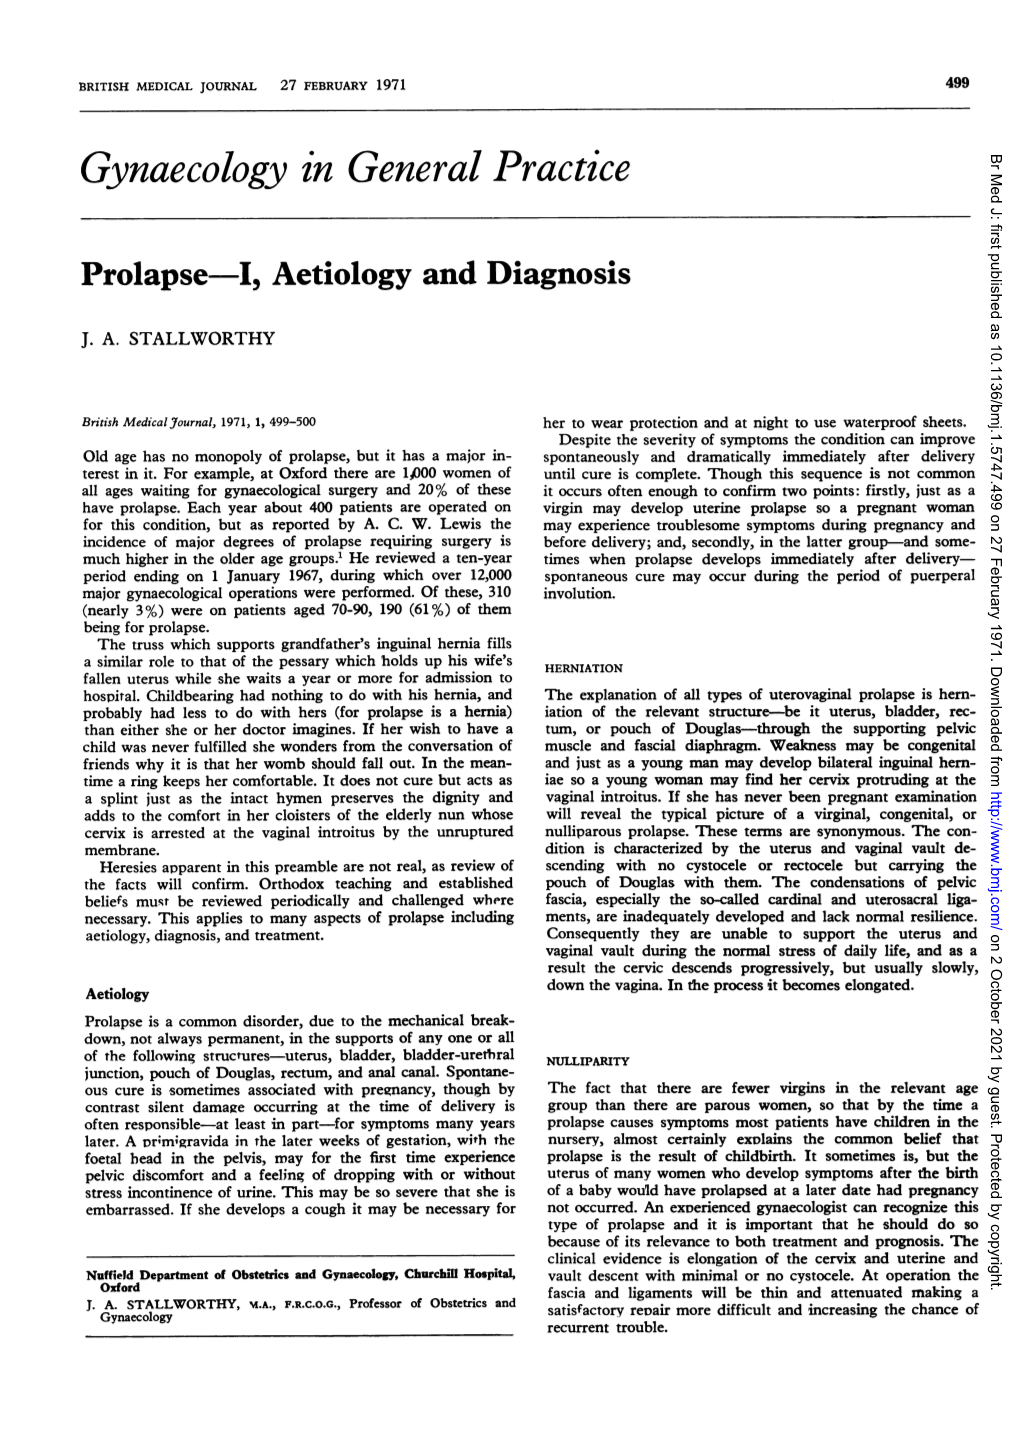 Prolapse-I, Aetiology and Diagnosis